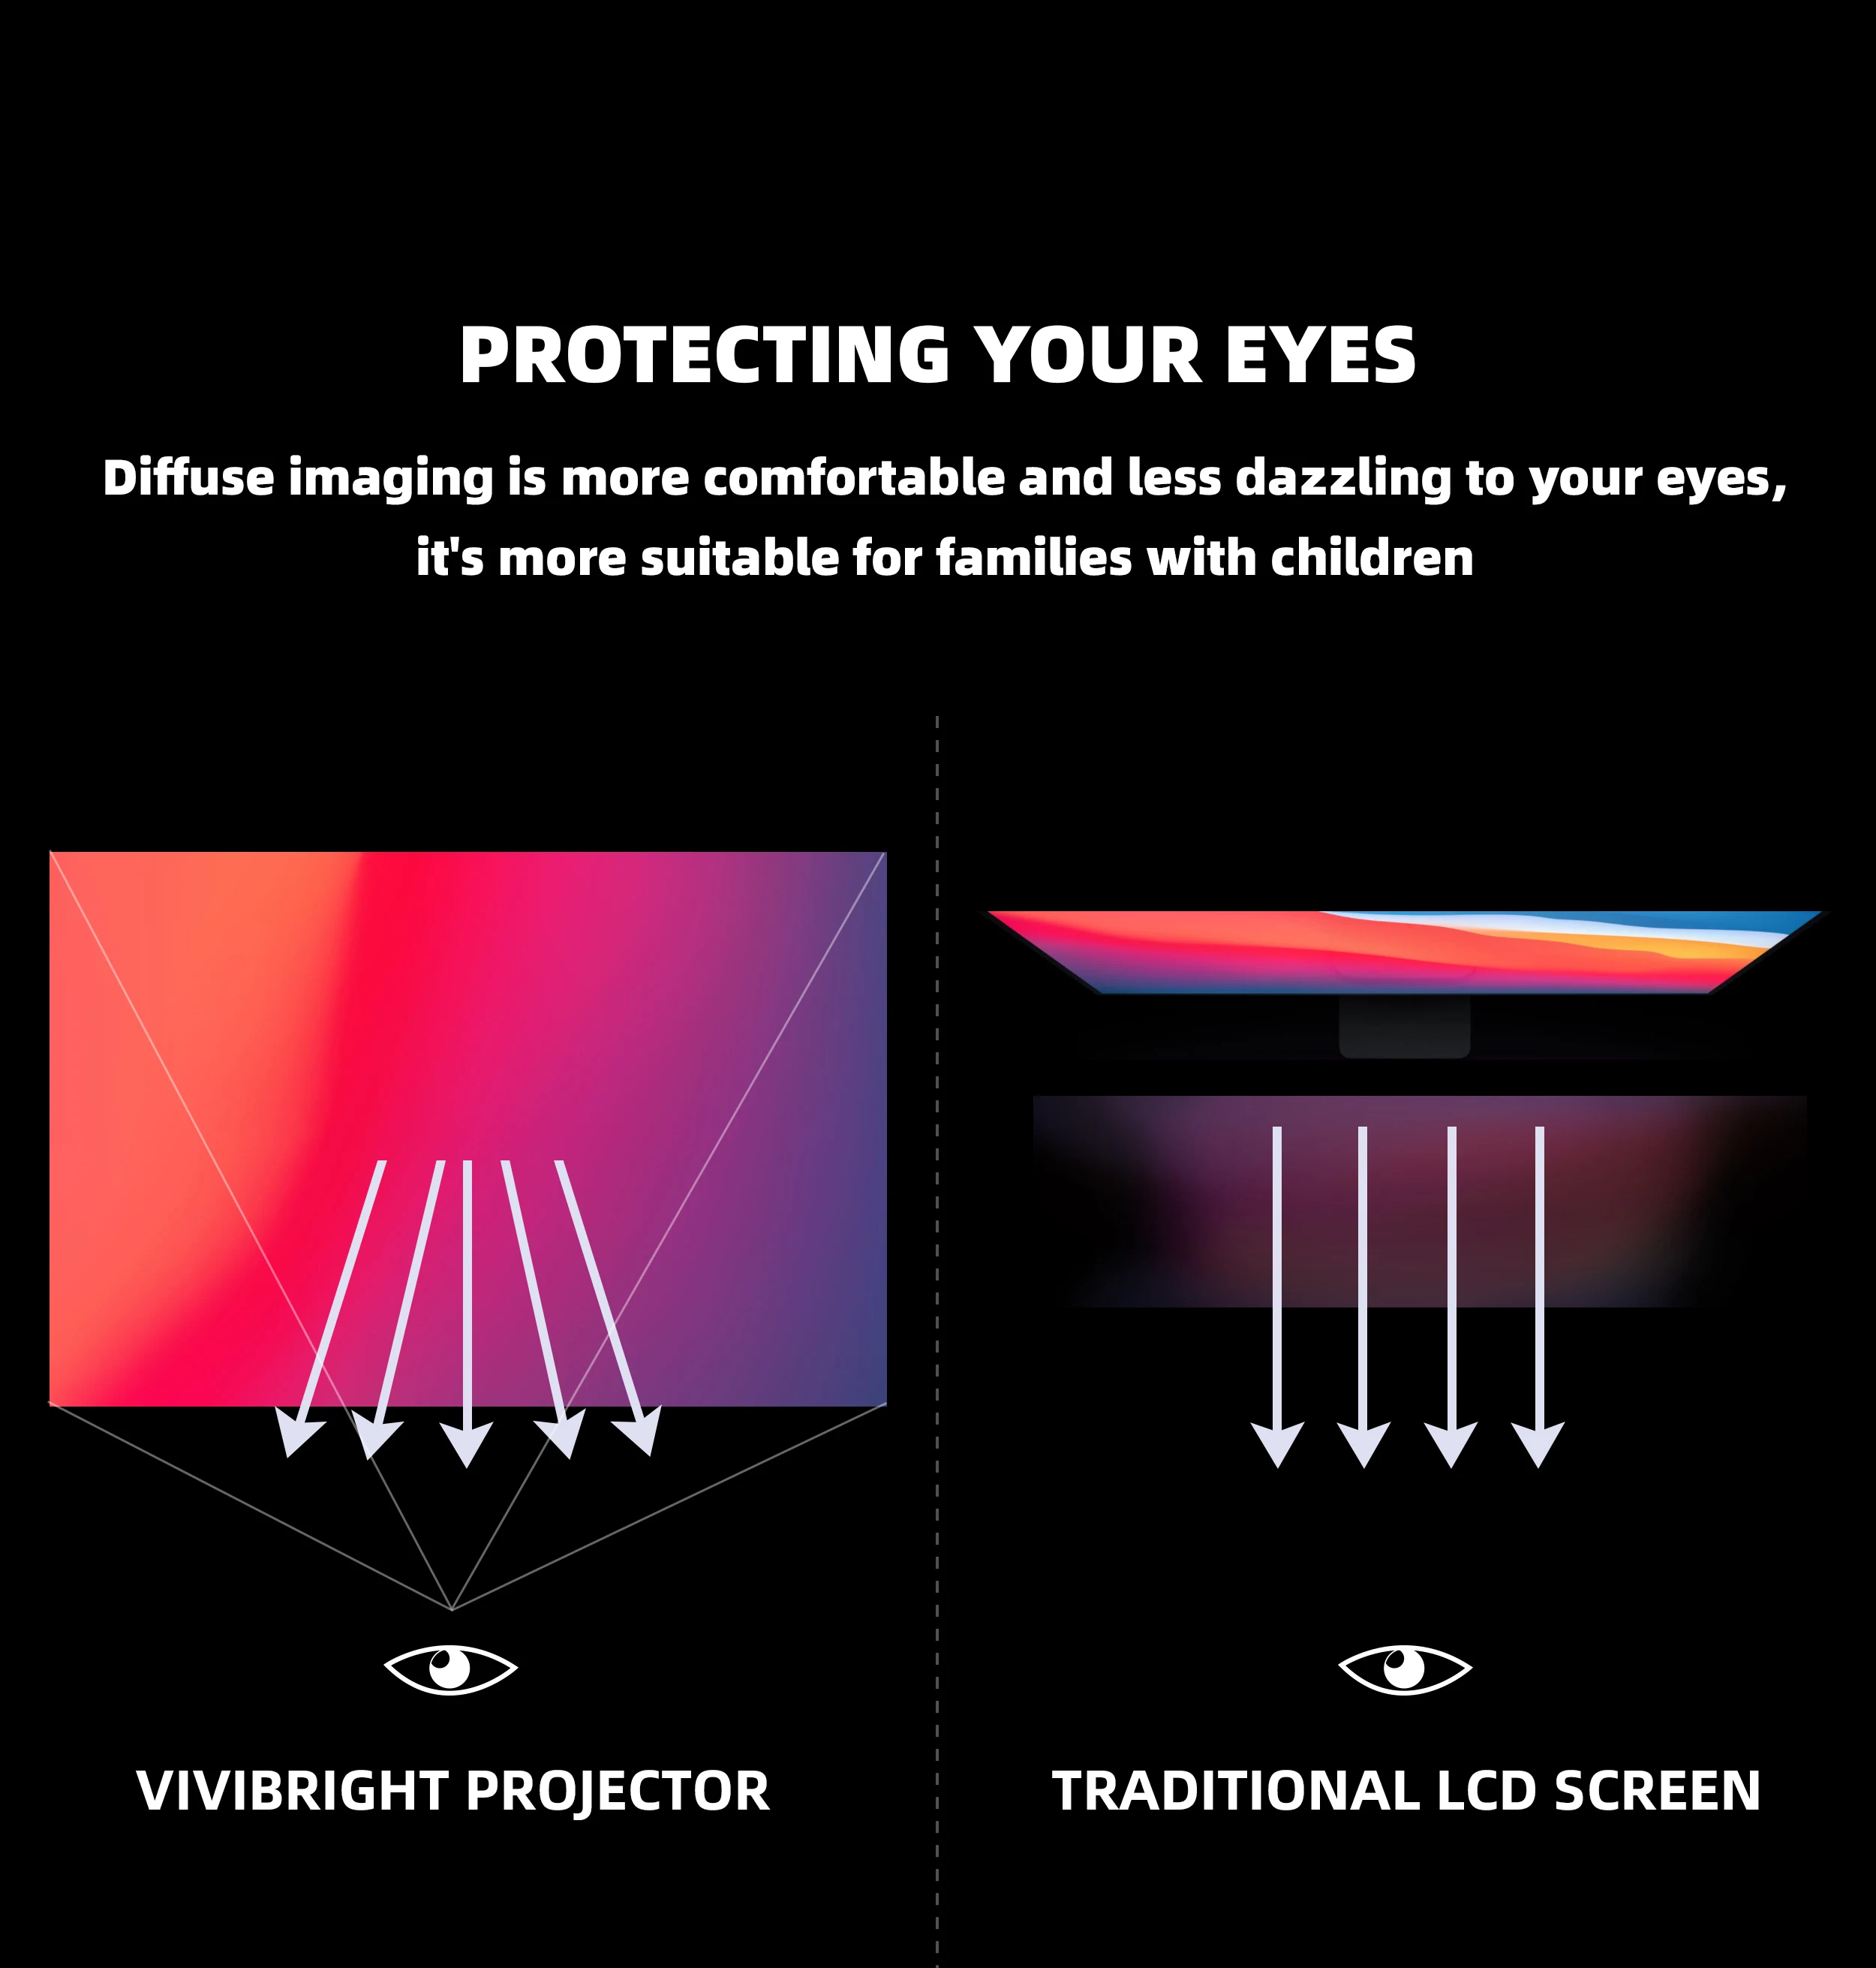 home projector VIVIBright F40 ANDROIDPortable LCD LED Projector Full HD 1080P Movie Video 3D Beamer With Remote Control Multimedia Home Theater xiaomi projector